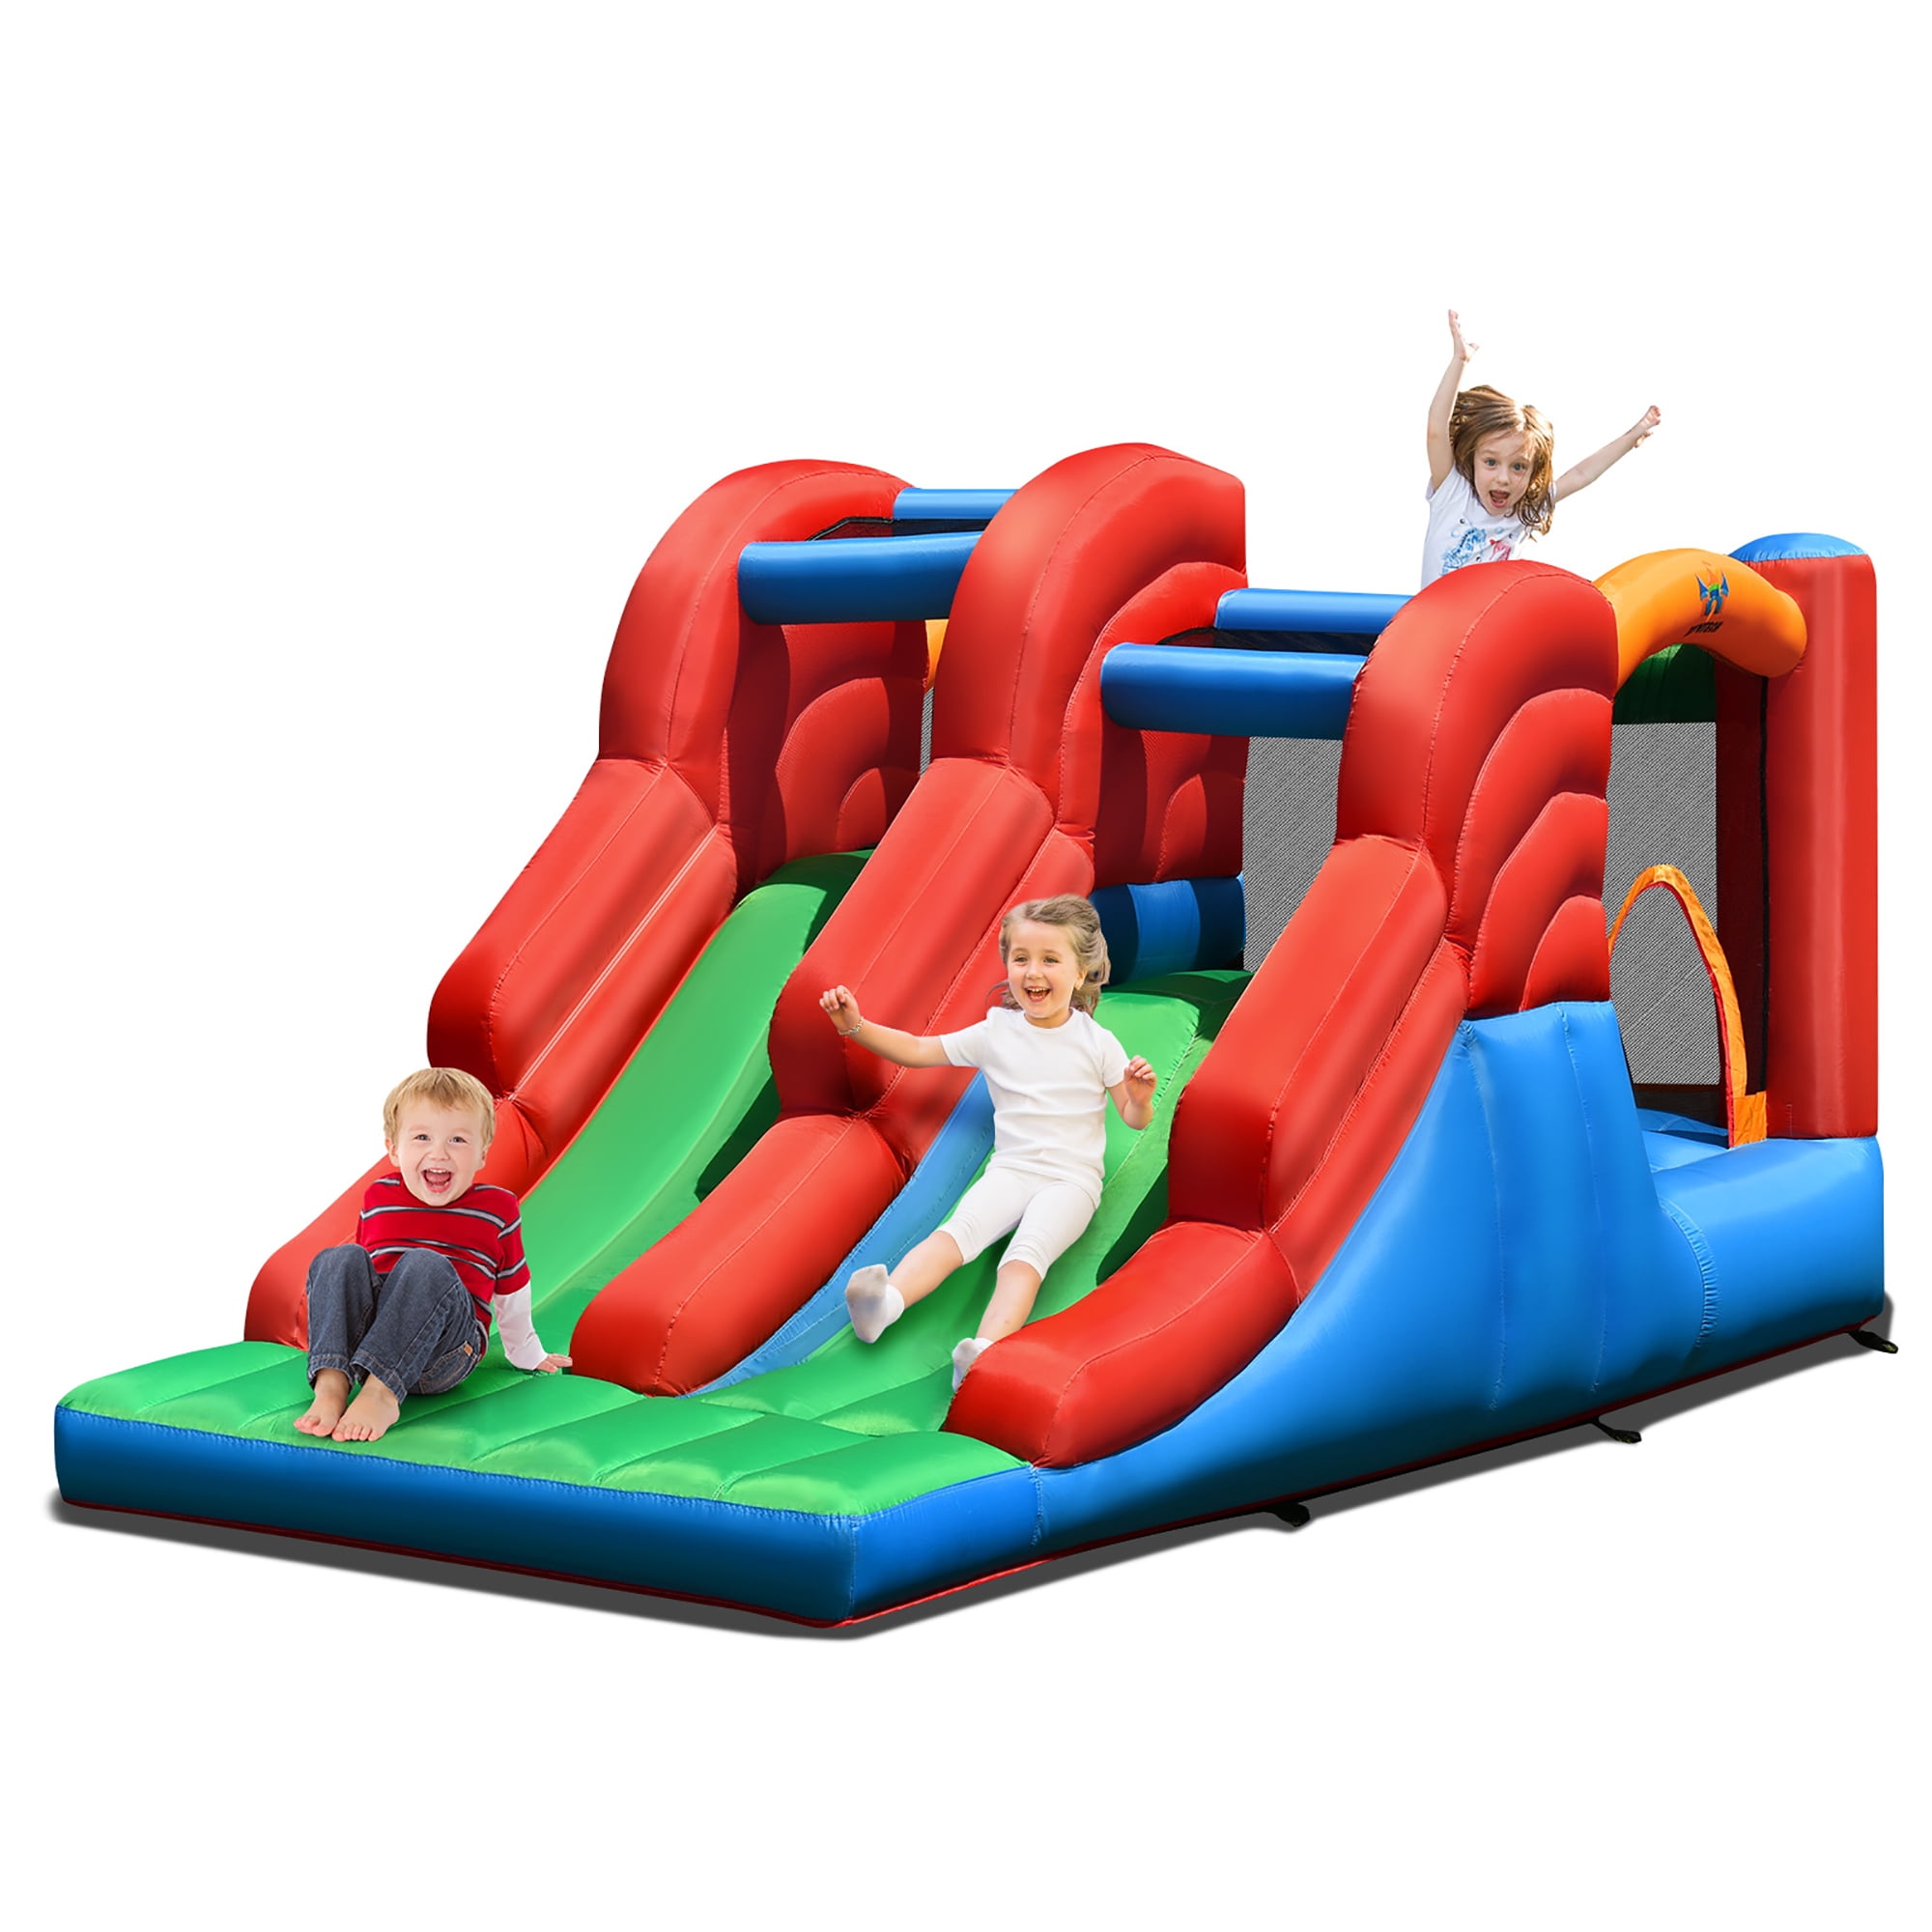 Bouncy Castle Family Backyard Jumping Jumping Castle with Slide Suitable for Children. Durable Sewing Extra-Thick Material N\C Inflatable Bounce Room with Hair Dryer 